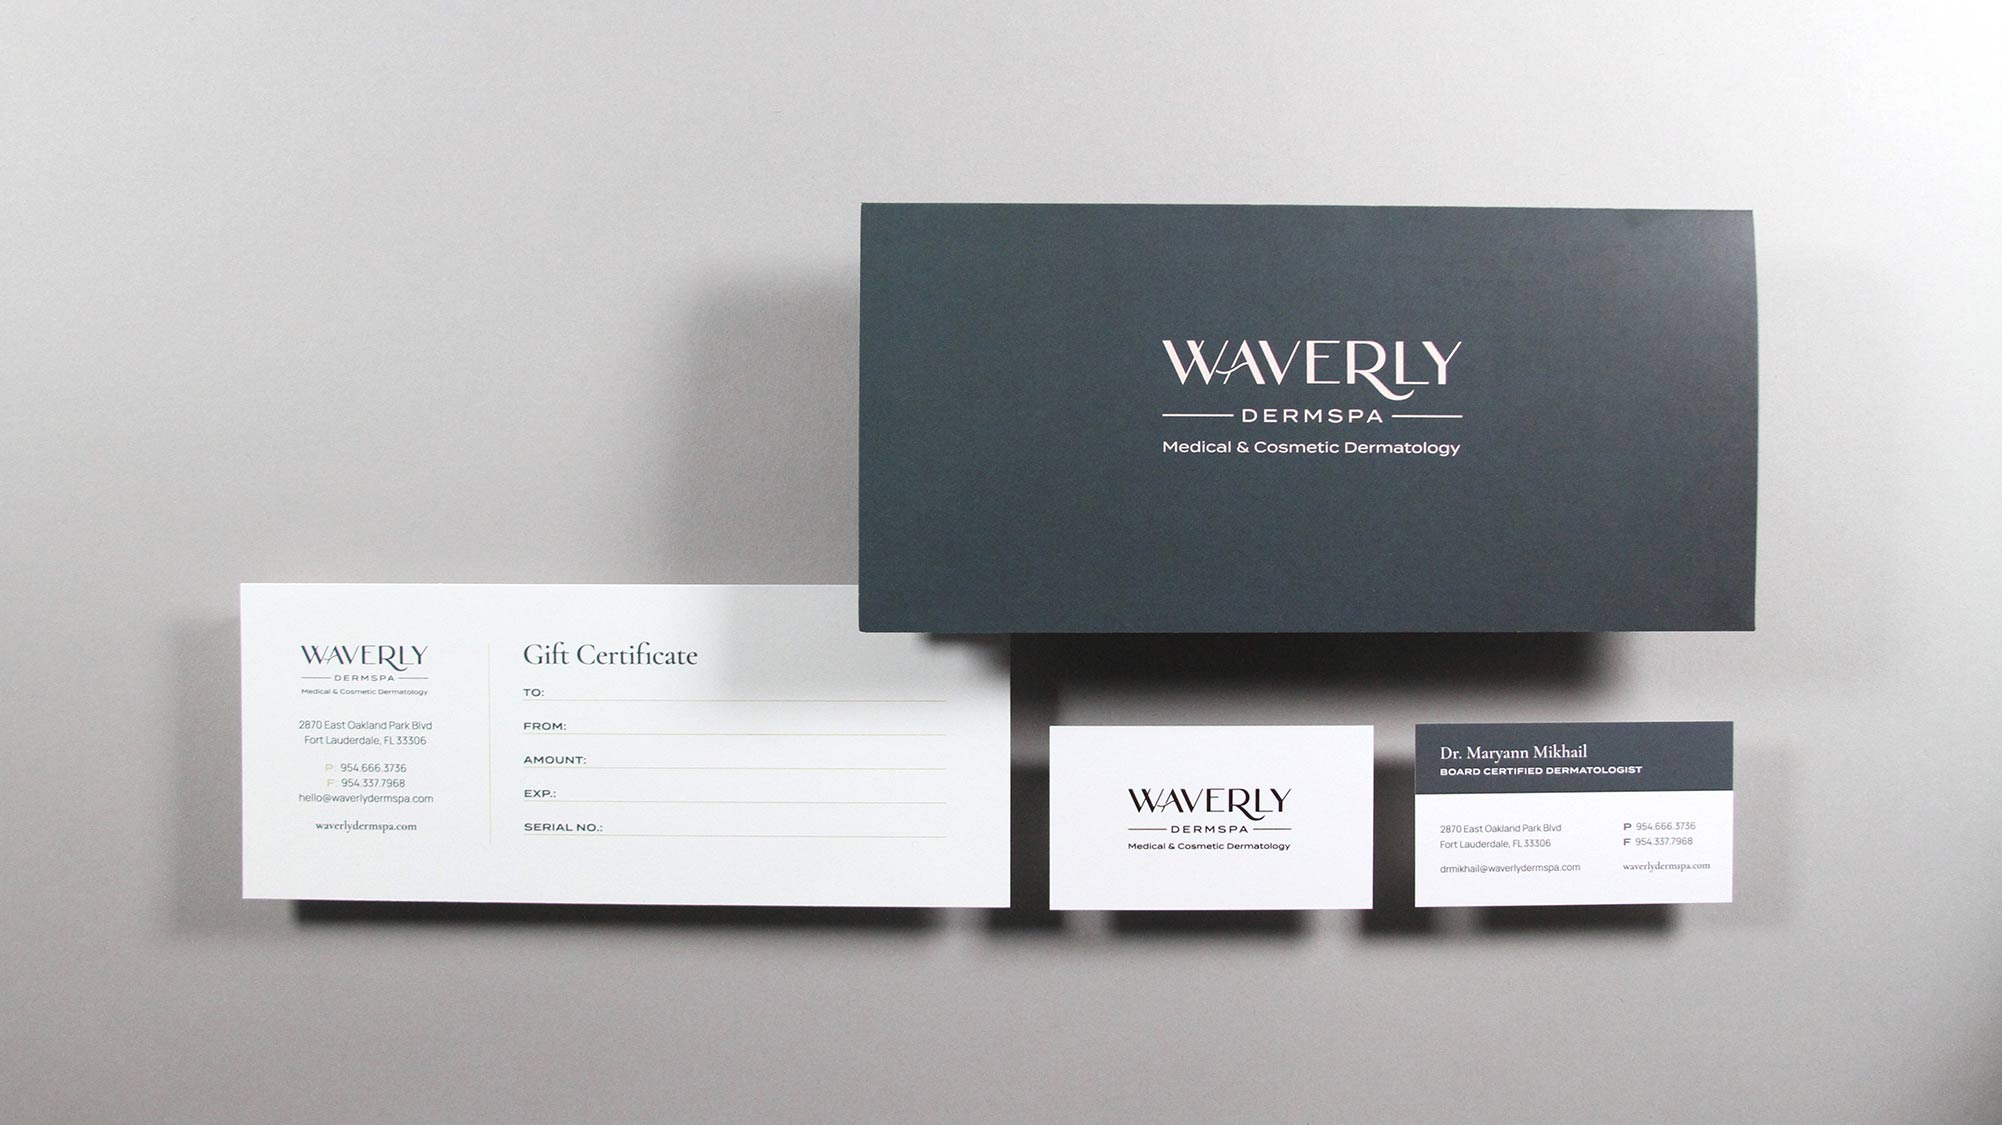 gift card presenter and business card design for a medical office branding suite